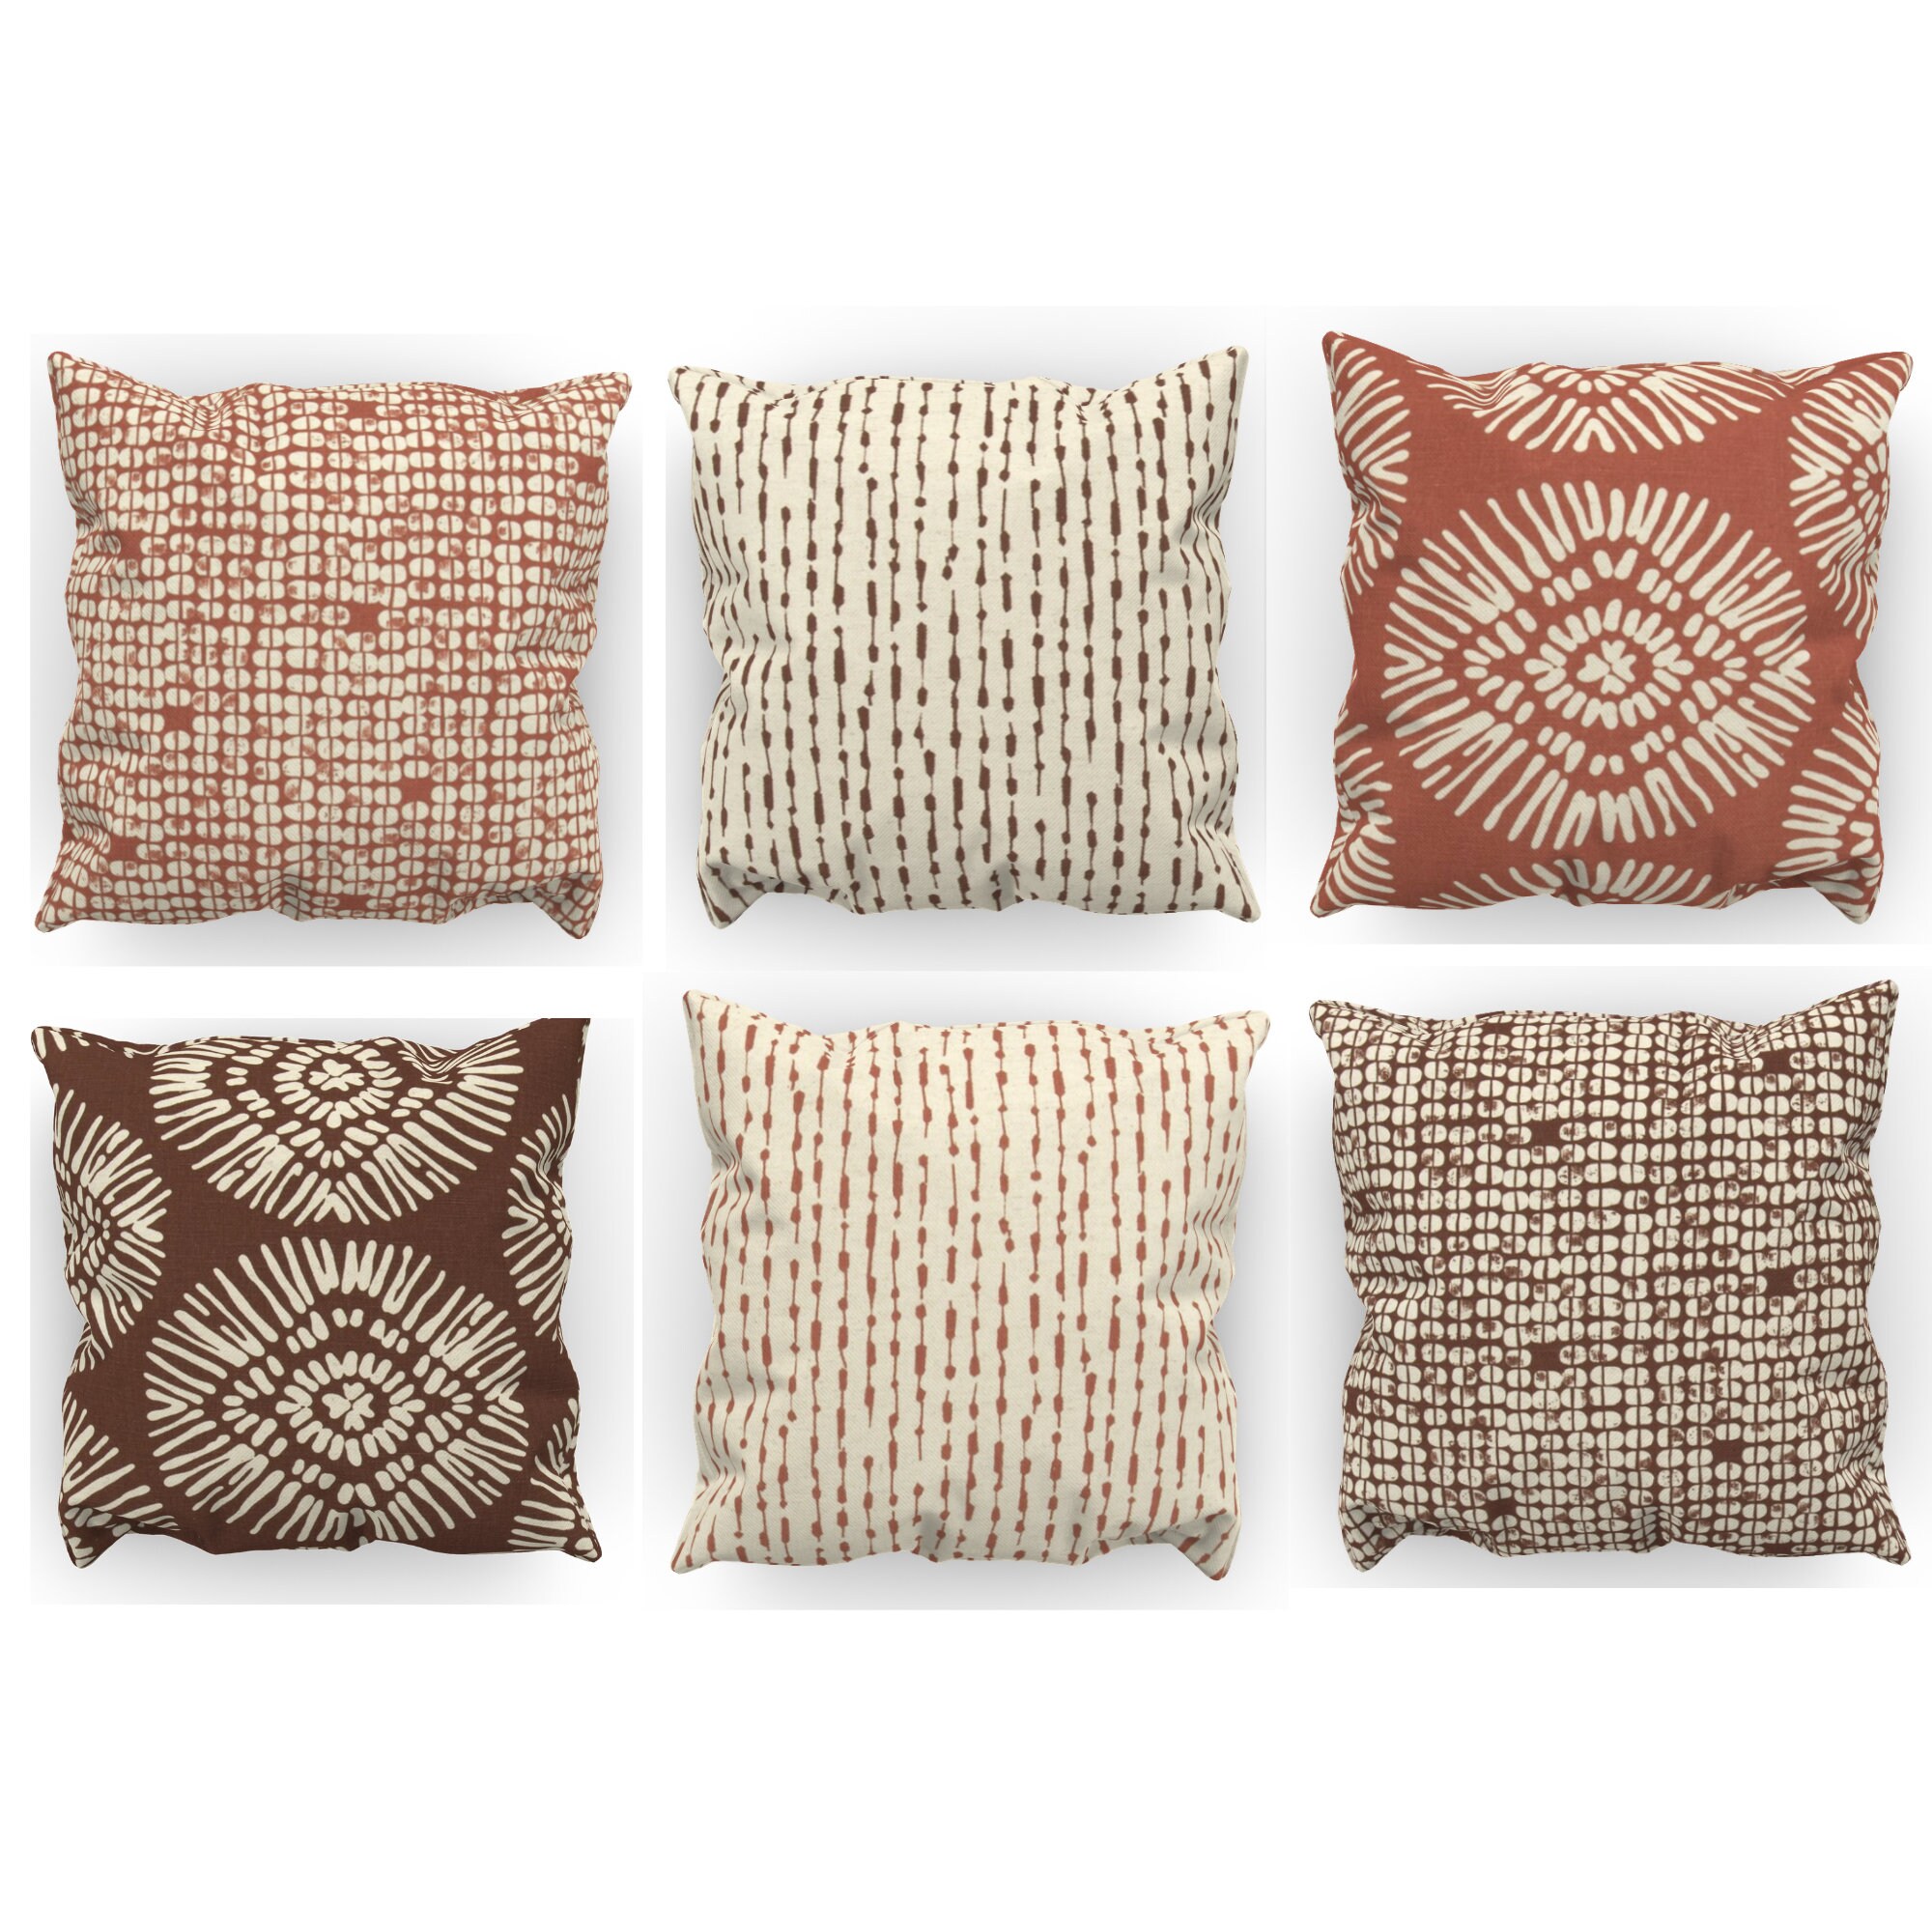 Topfinel Terracotta Couch Throw Pillows Covers Set of 4,Square 18x18 Inches  Rust Rustic Home Decor Cushion,Unique Linen Accent Pillowcase for